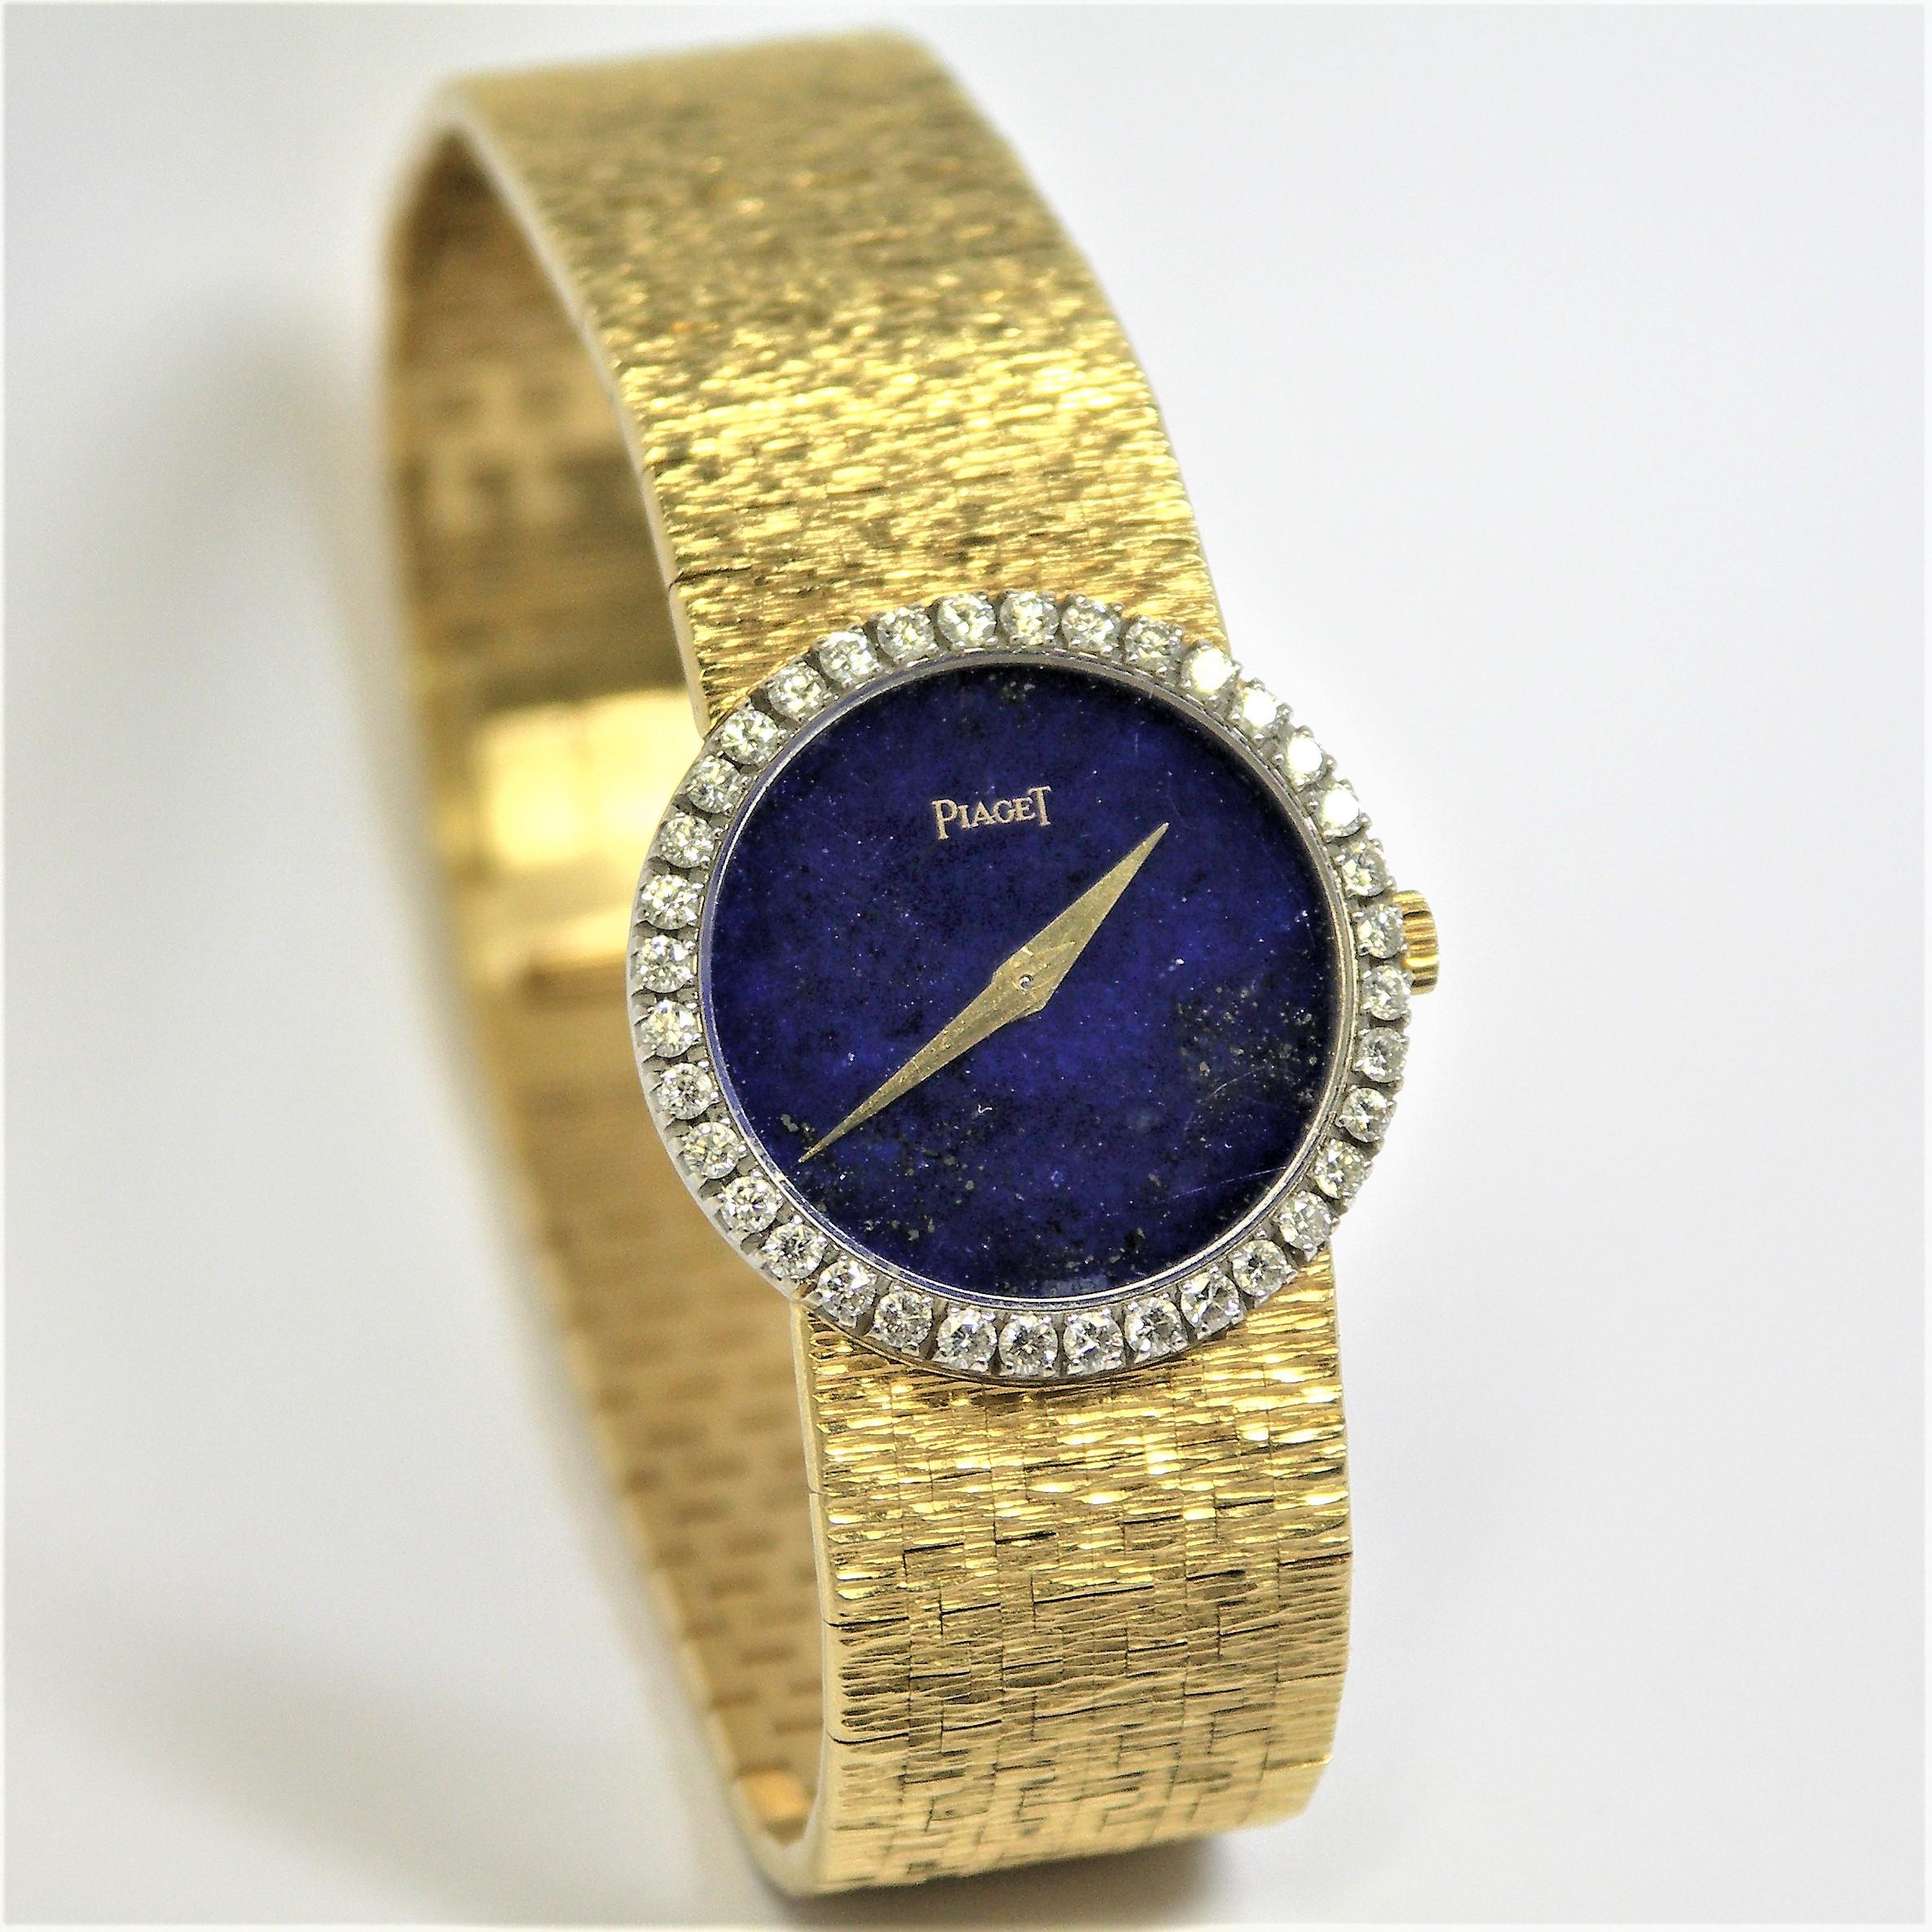 Made of 18K Yellow Gold with a round, lapis lazuli dial surrounded by diamonds
weighing an approximate total of 1.00CT, this lovely Piaget watch would be a welcome addition to any lady's collection. The bark finish band is crisp and is in
very good